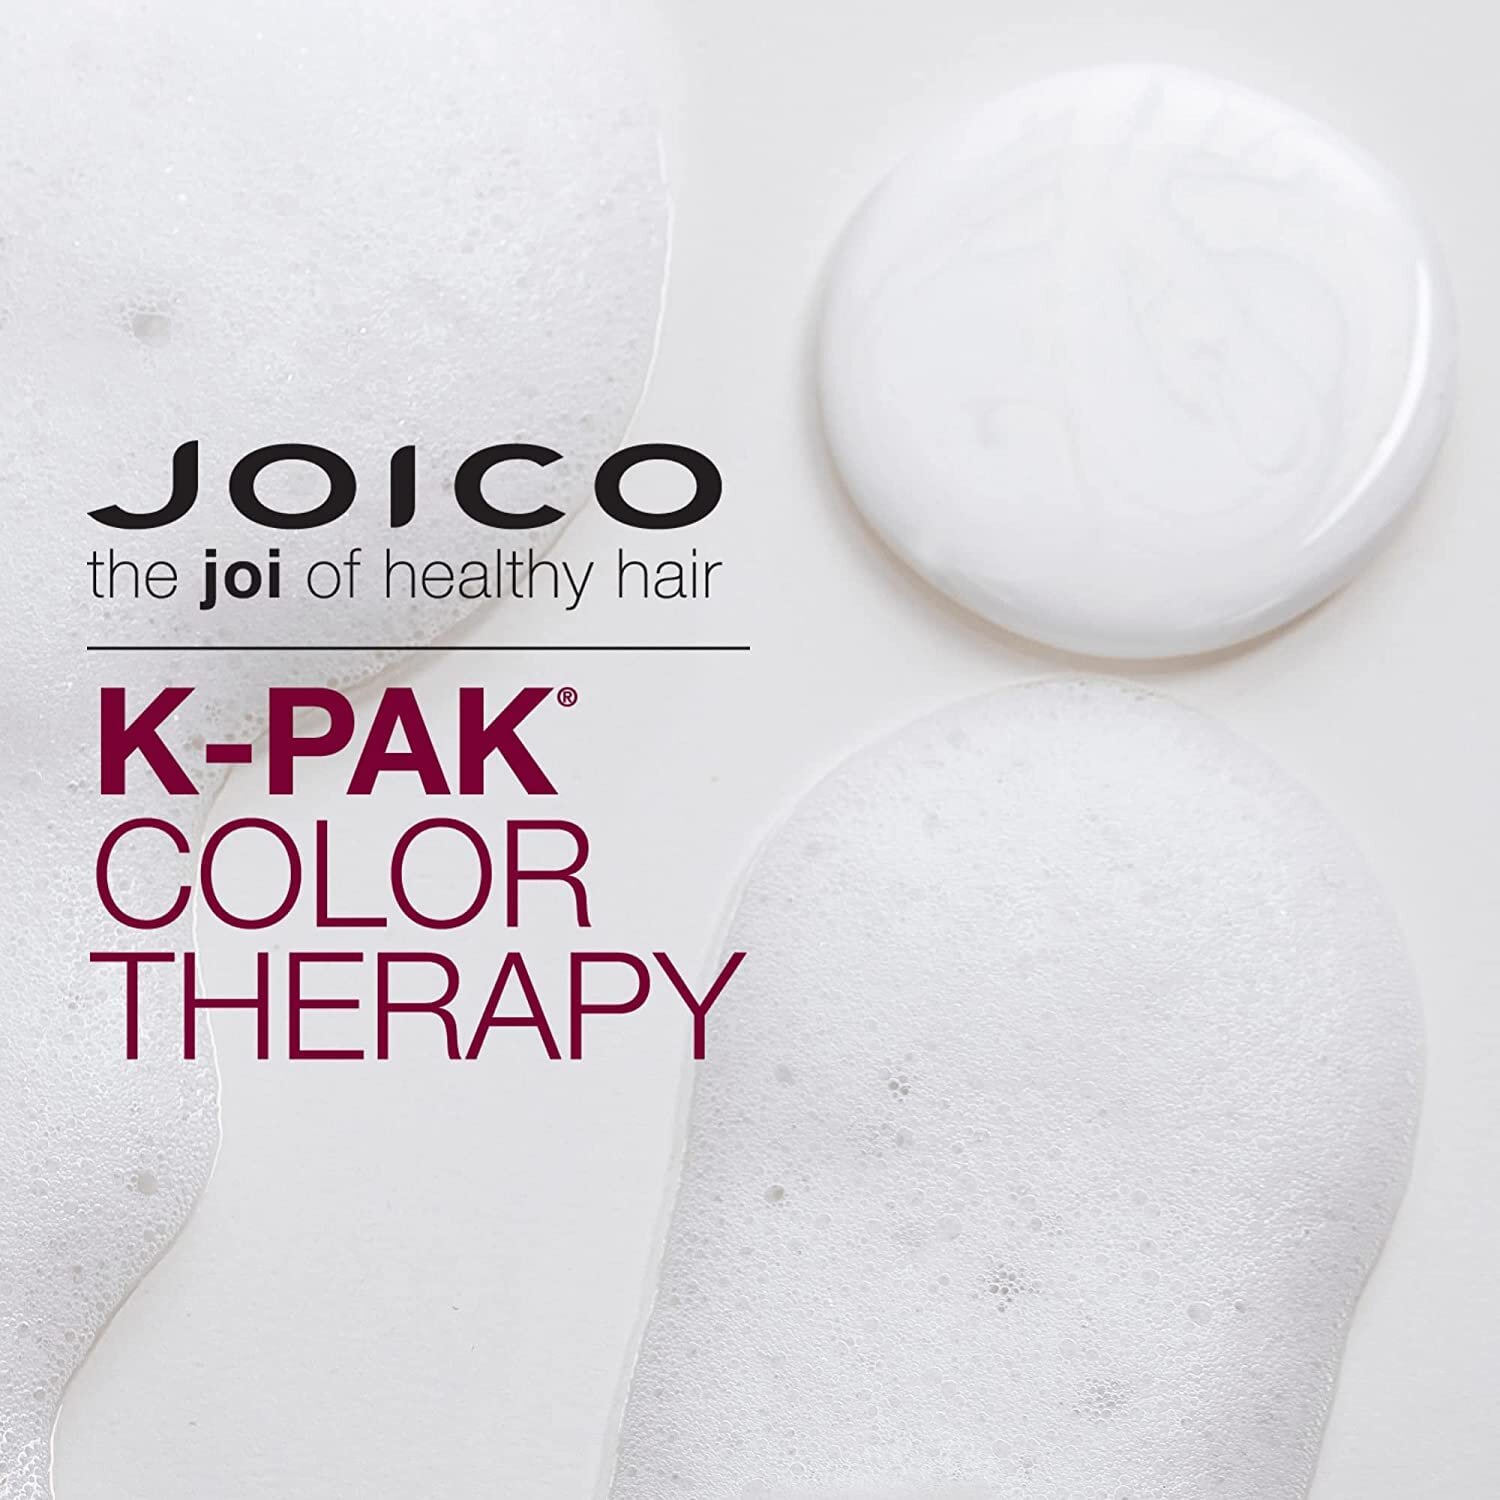 K-Pak Color Therapy kit by Joico for Unisex - 2 Pc Kit 33.8 oz Shampoo, 33.8 oz Conditioner - image 6 of 6